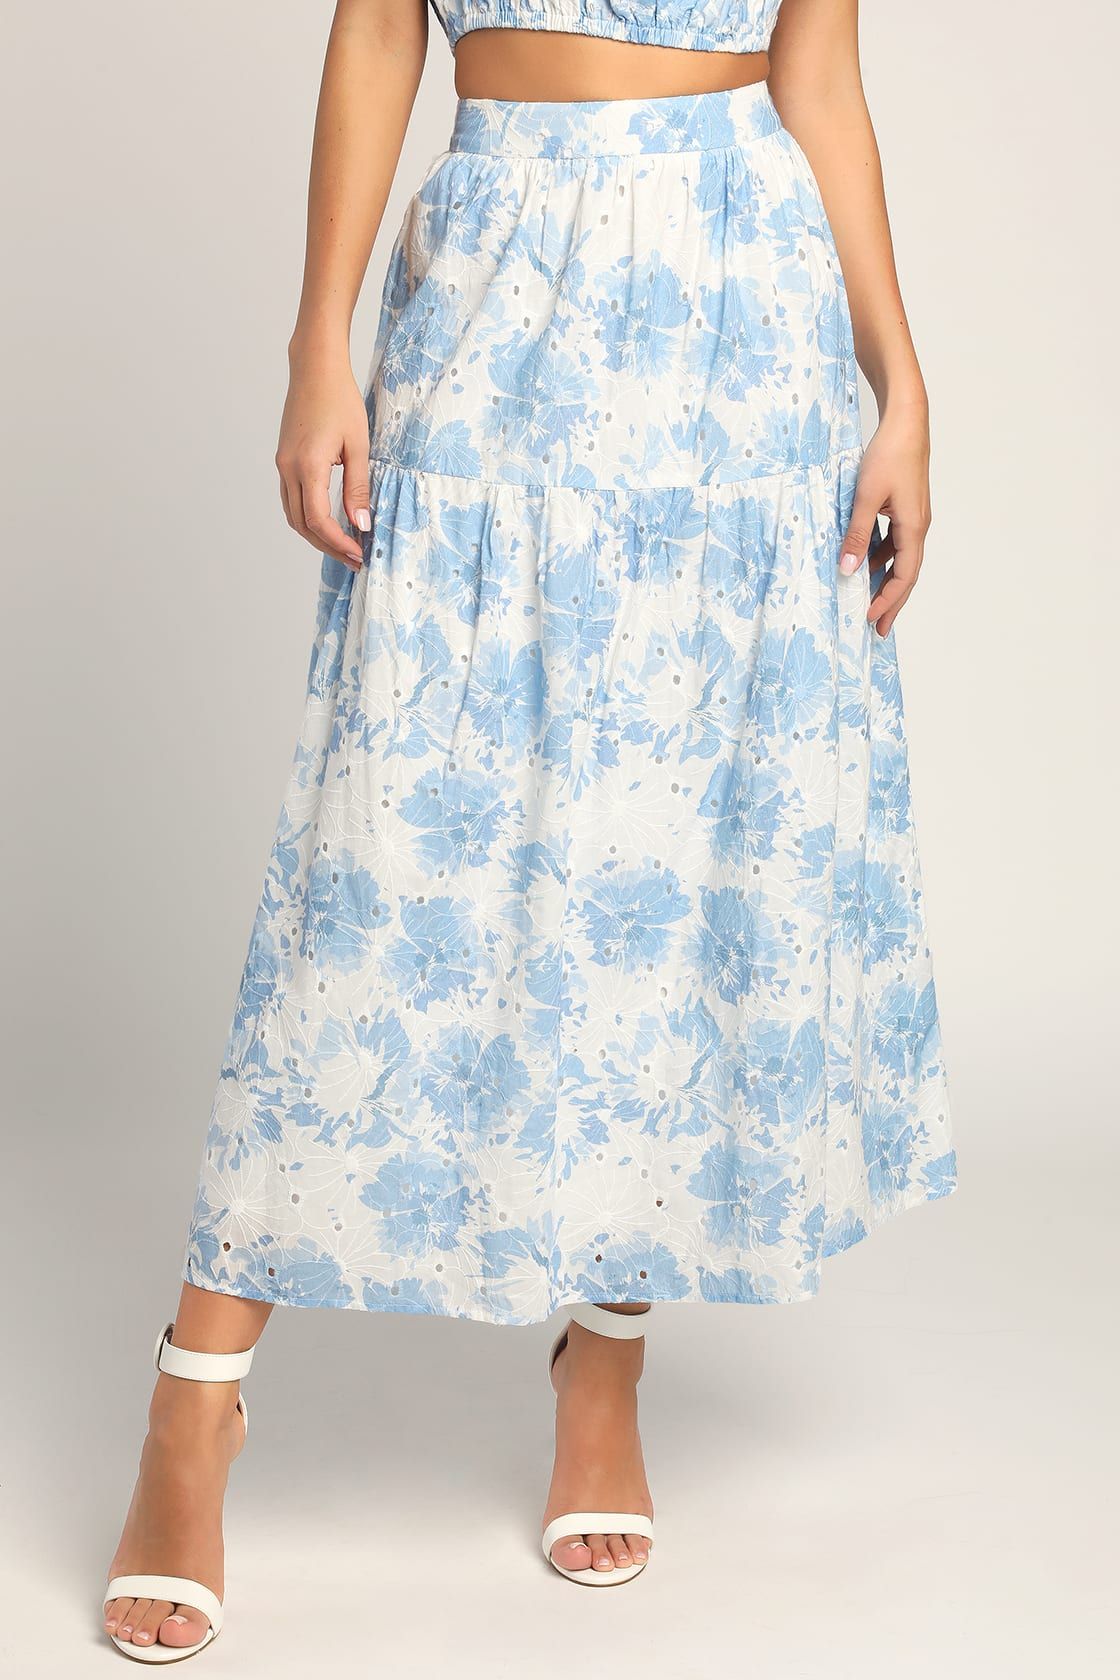 Made for Mallorca White and Blue Eyelet Tiered Maxi Skirt | Lulus (US)